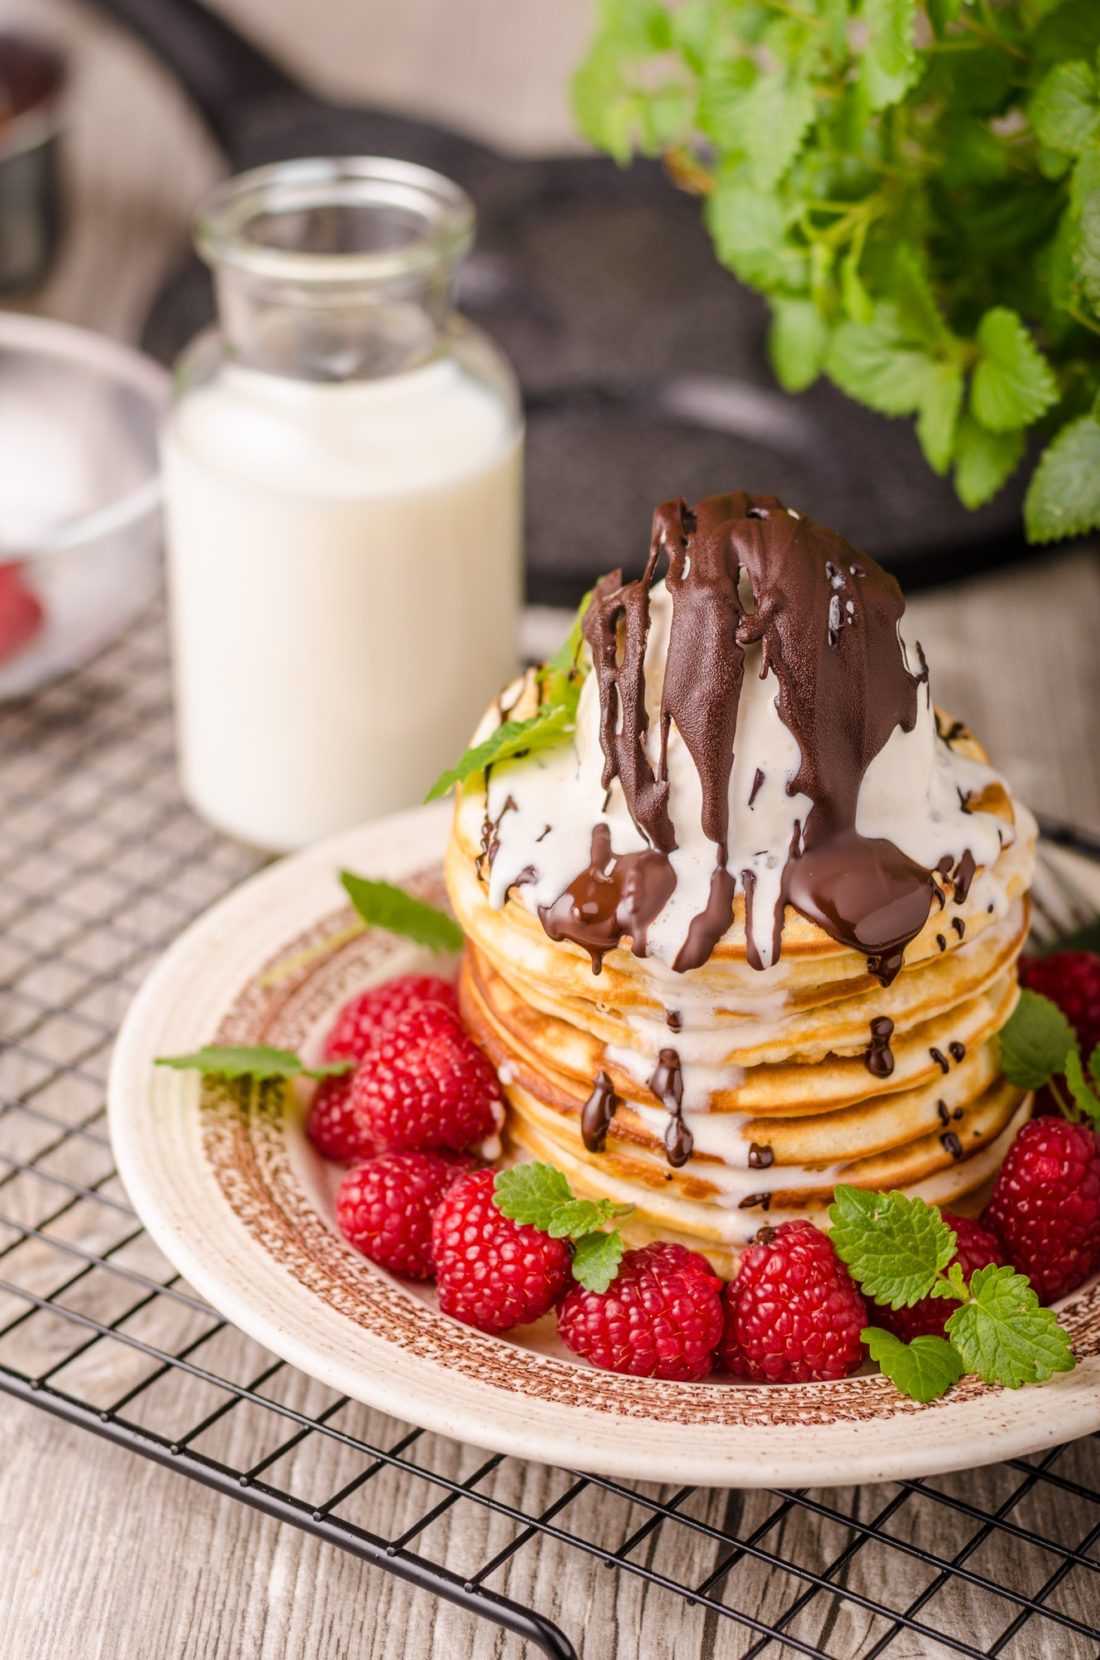 American pancakes with icecream and chocolate